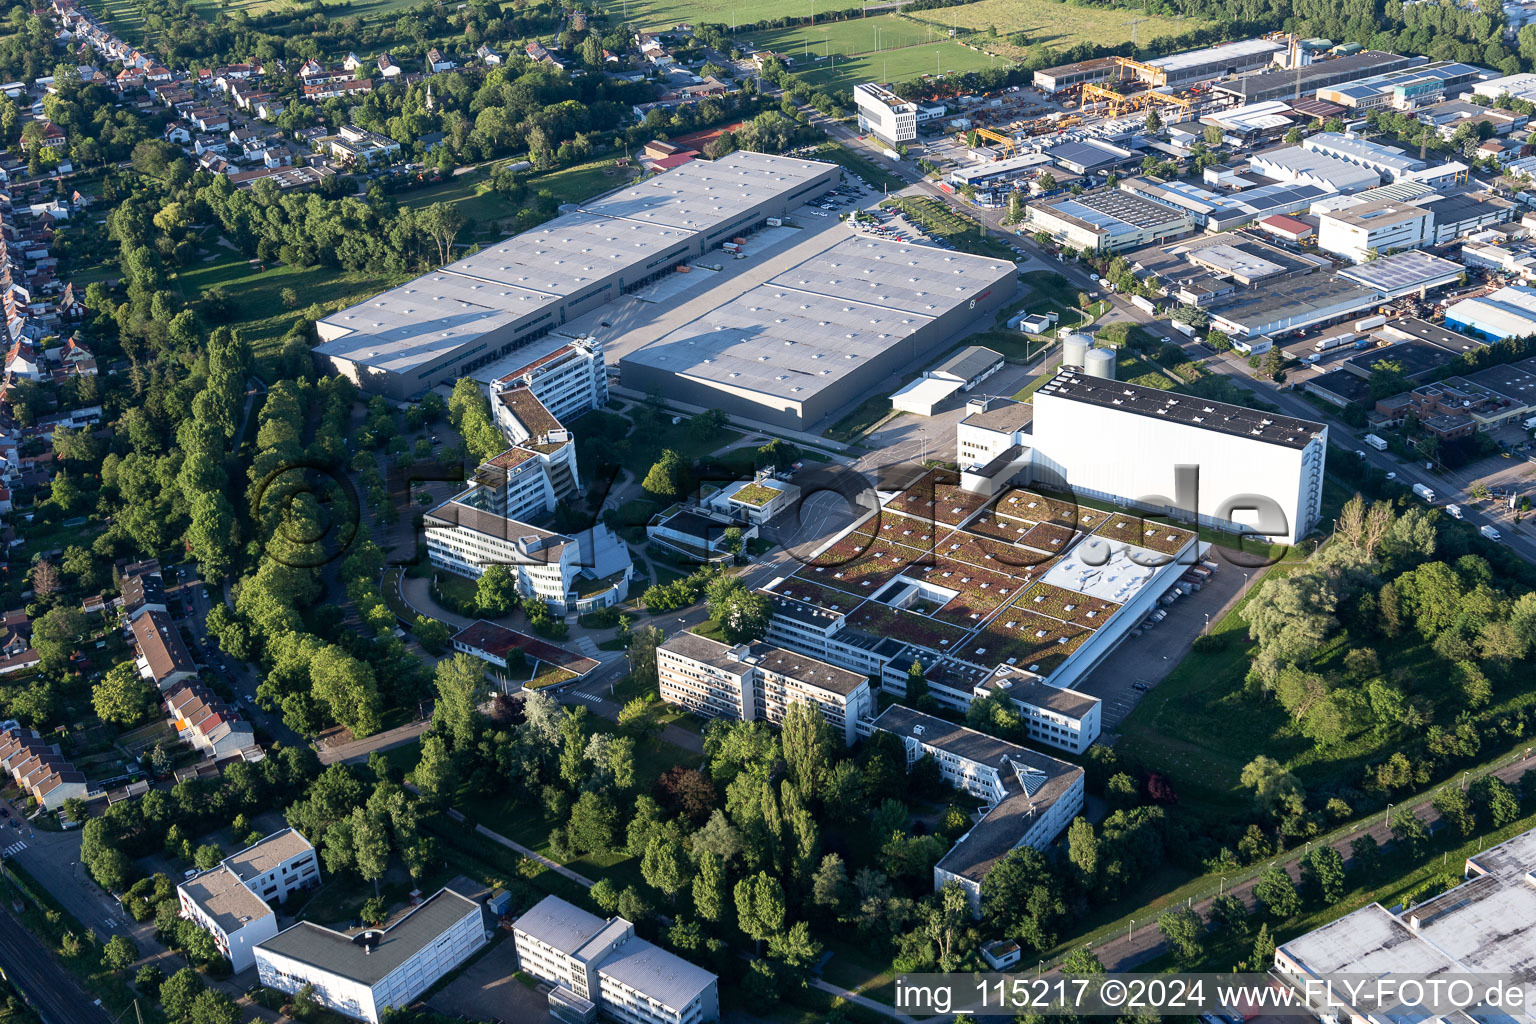 Industrial and commercial area Pfizerstrasse with Intel Deutschland GmbH, Simon Hegele Gesellschaft fuer Logistik and Service mbH, Bandesamt fuer Migration and Fluechtlinge - BAMF Karlsruhe and Pfizer Deutschland GmbH in Karlsruhe in the state Baden-Wurttemberg, Germany